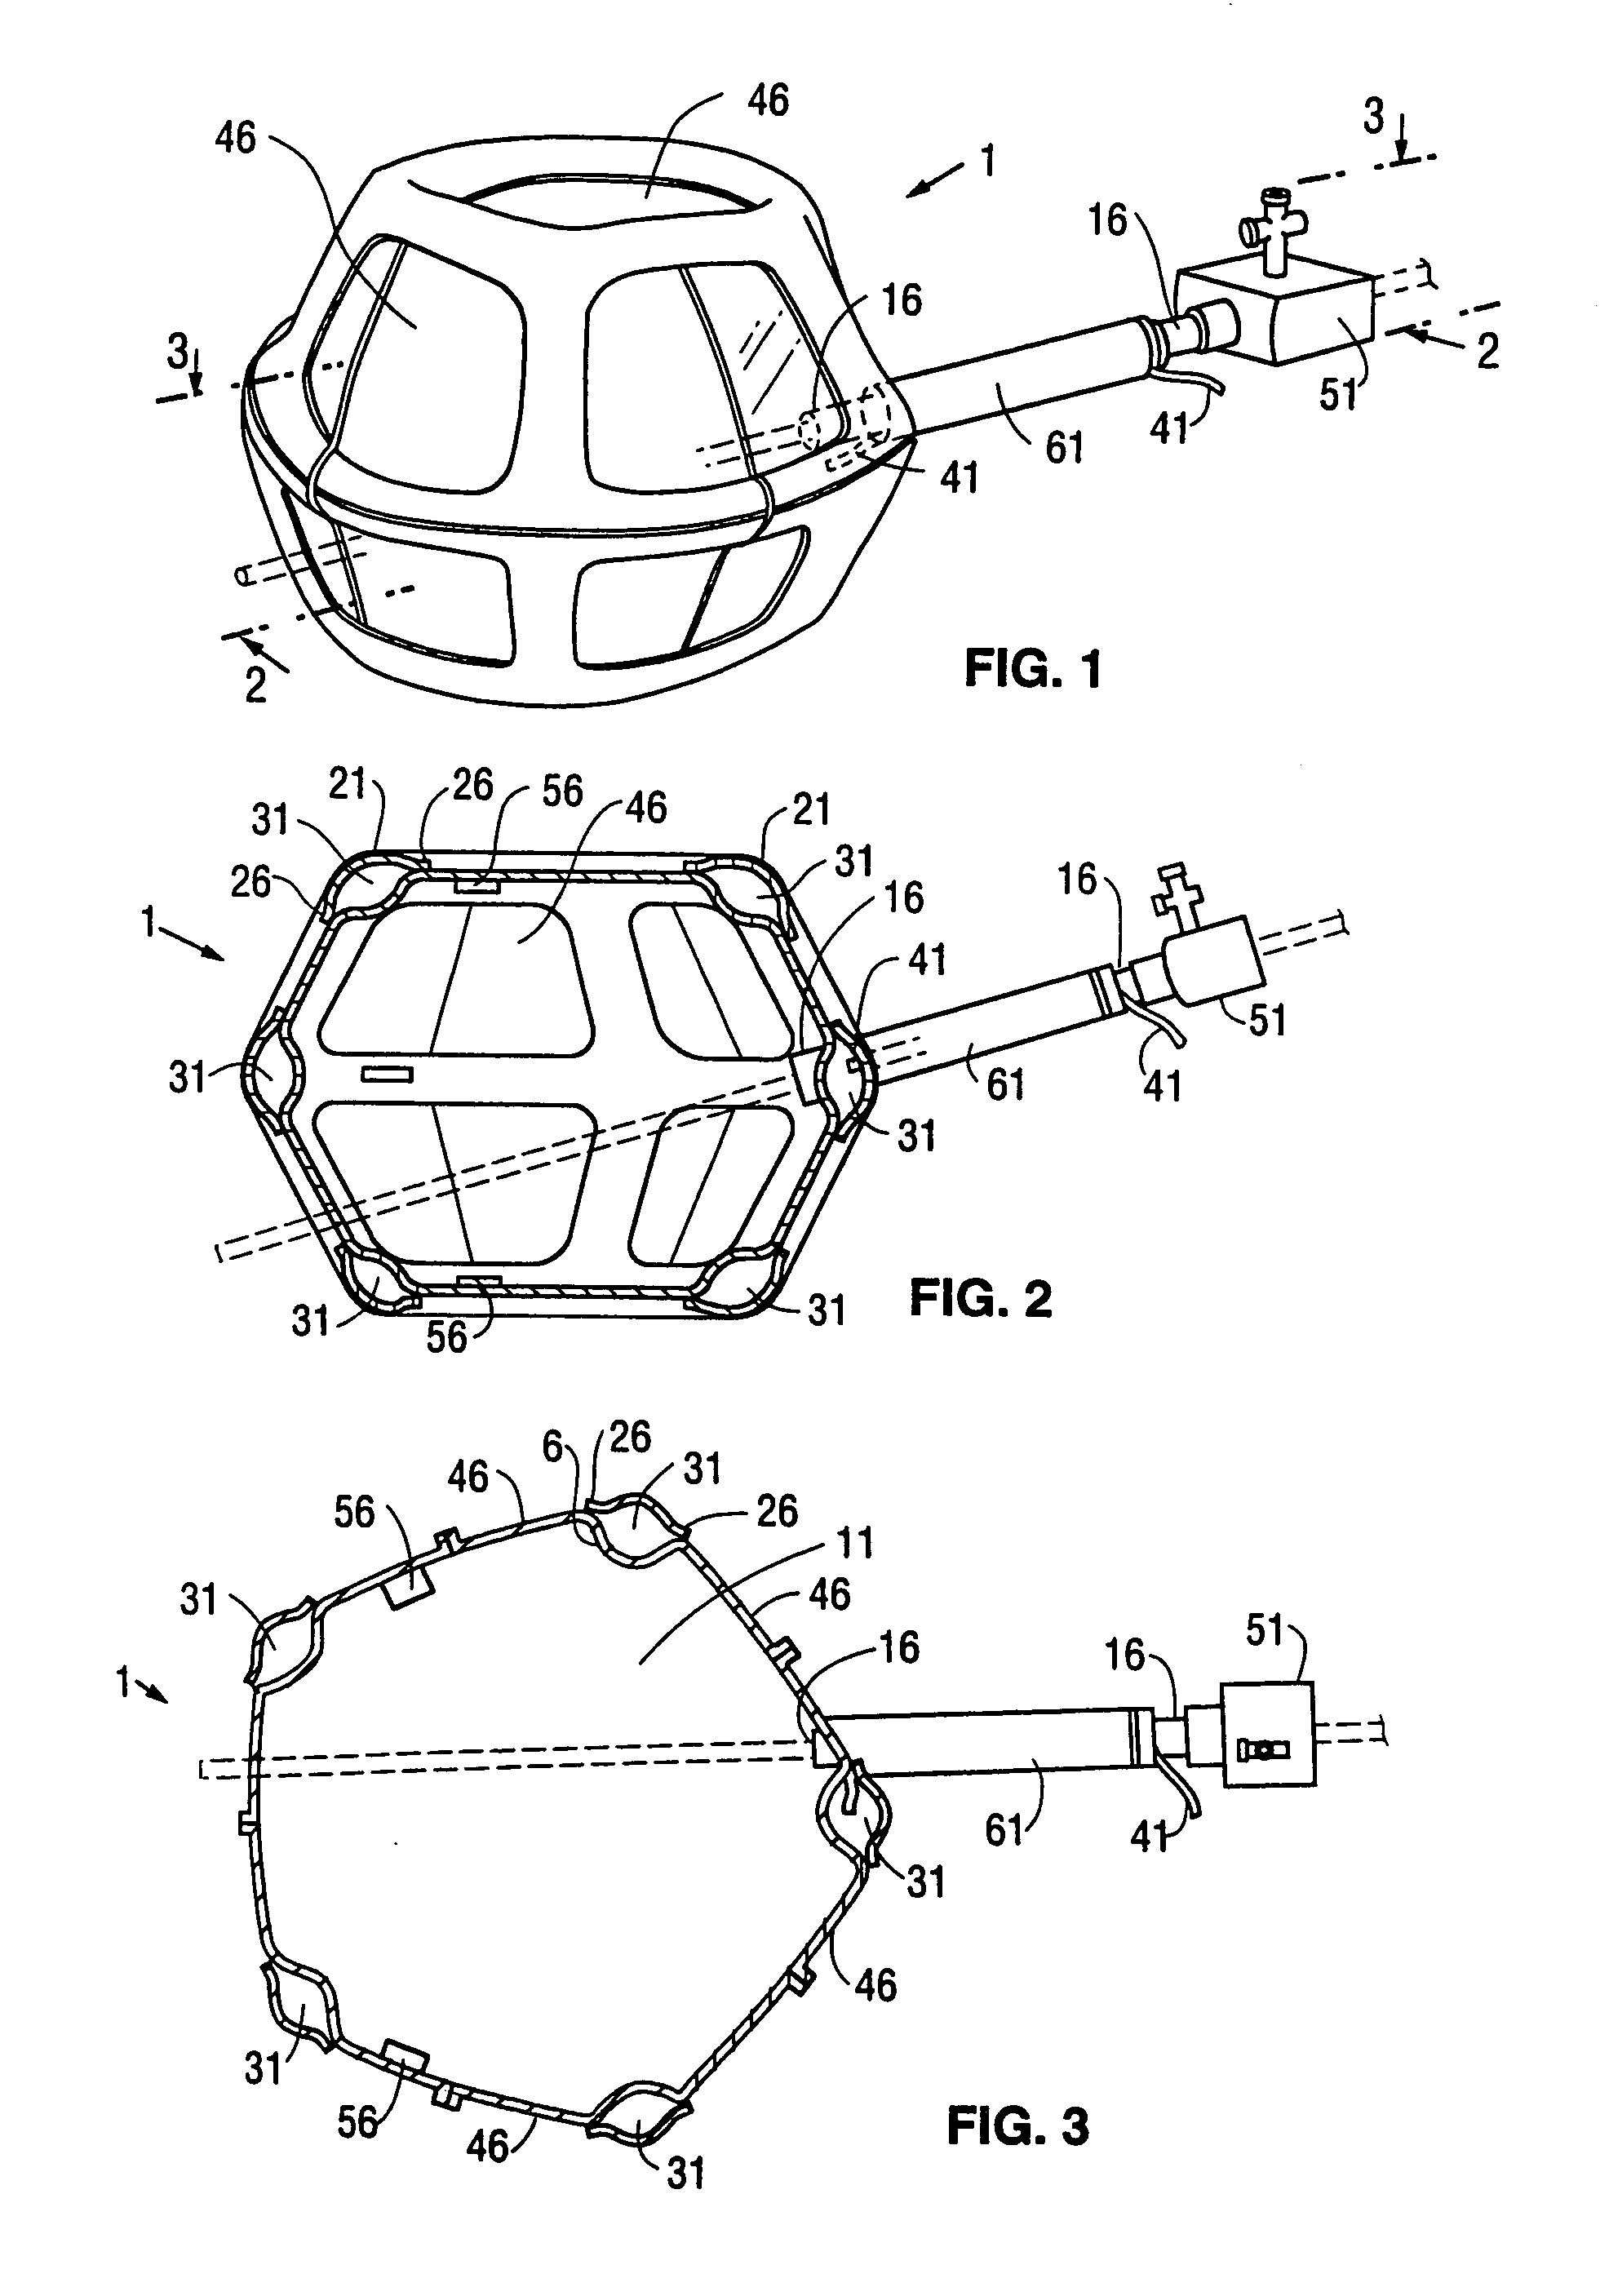 Endoscopic inflatable retraction device, method of using, and method of making